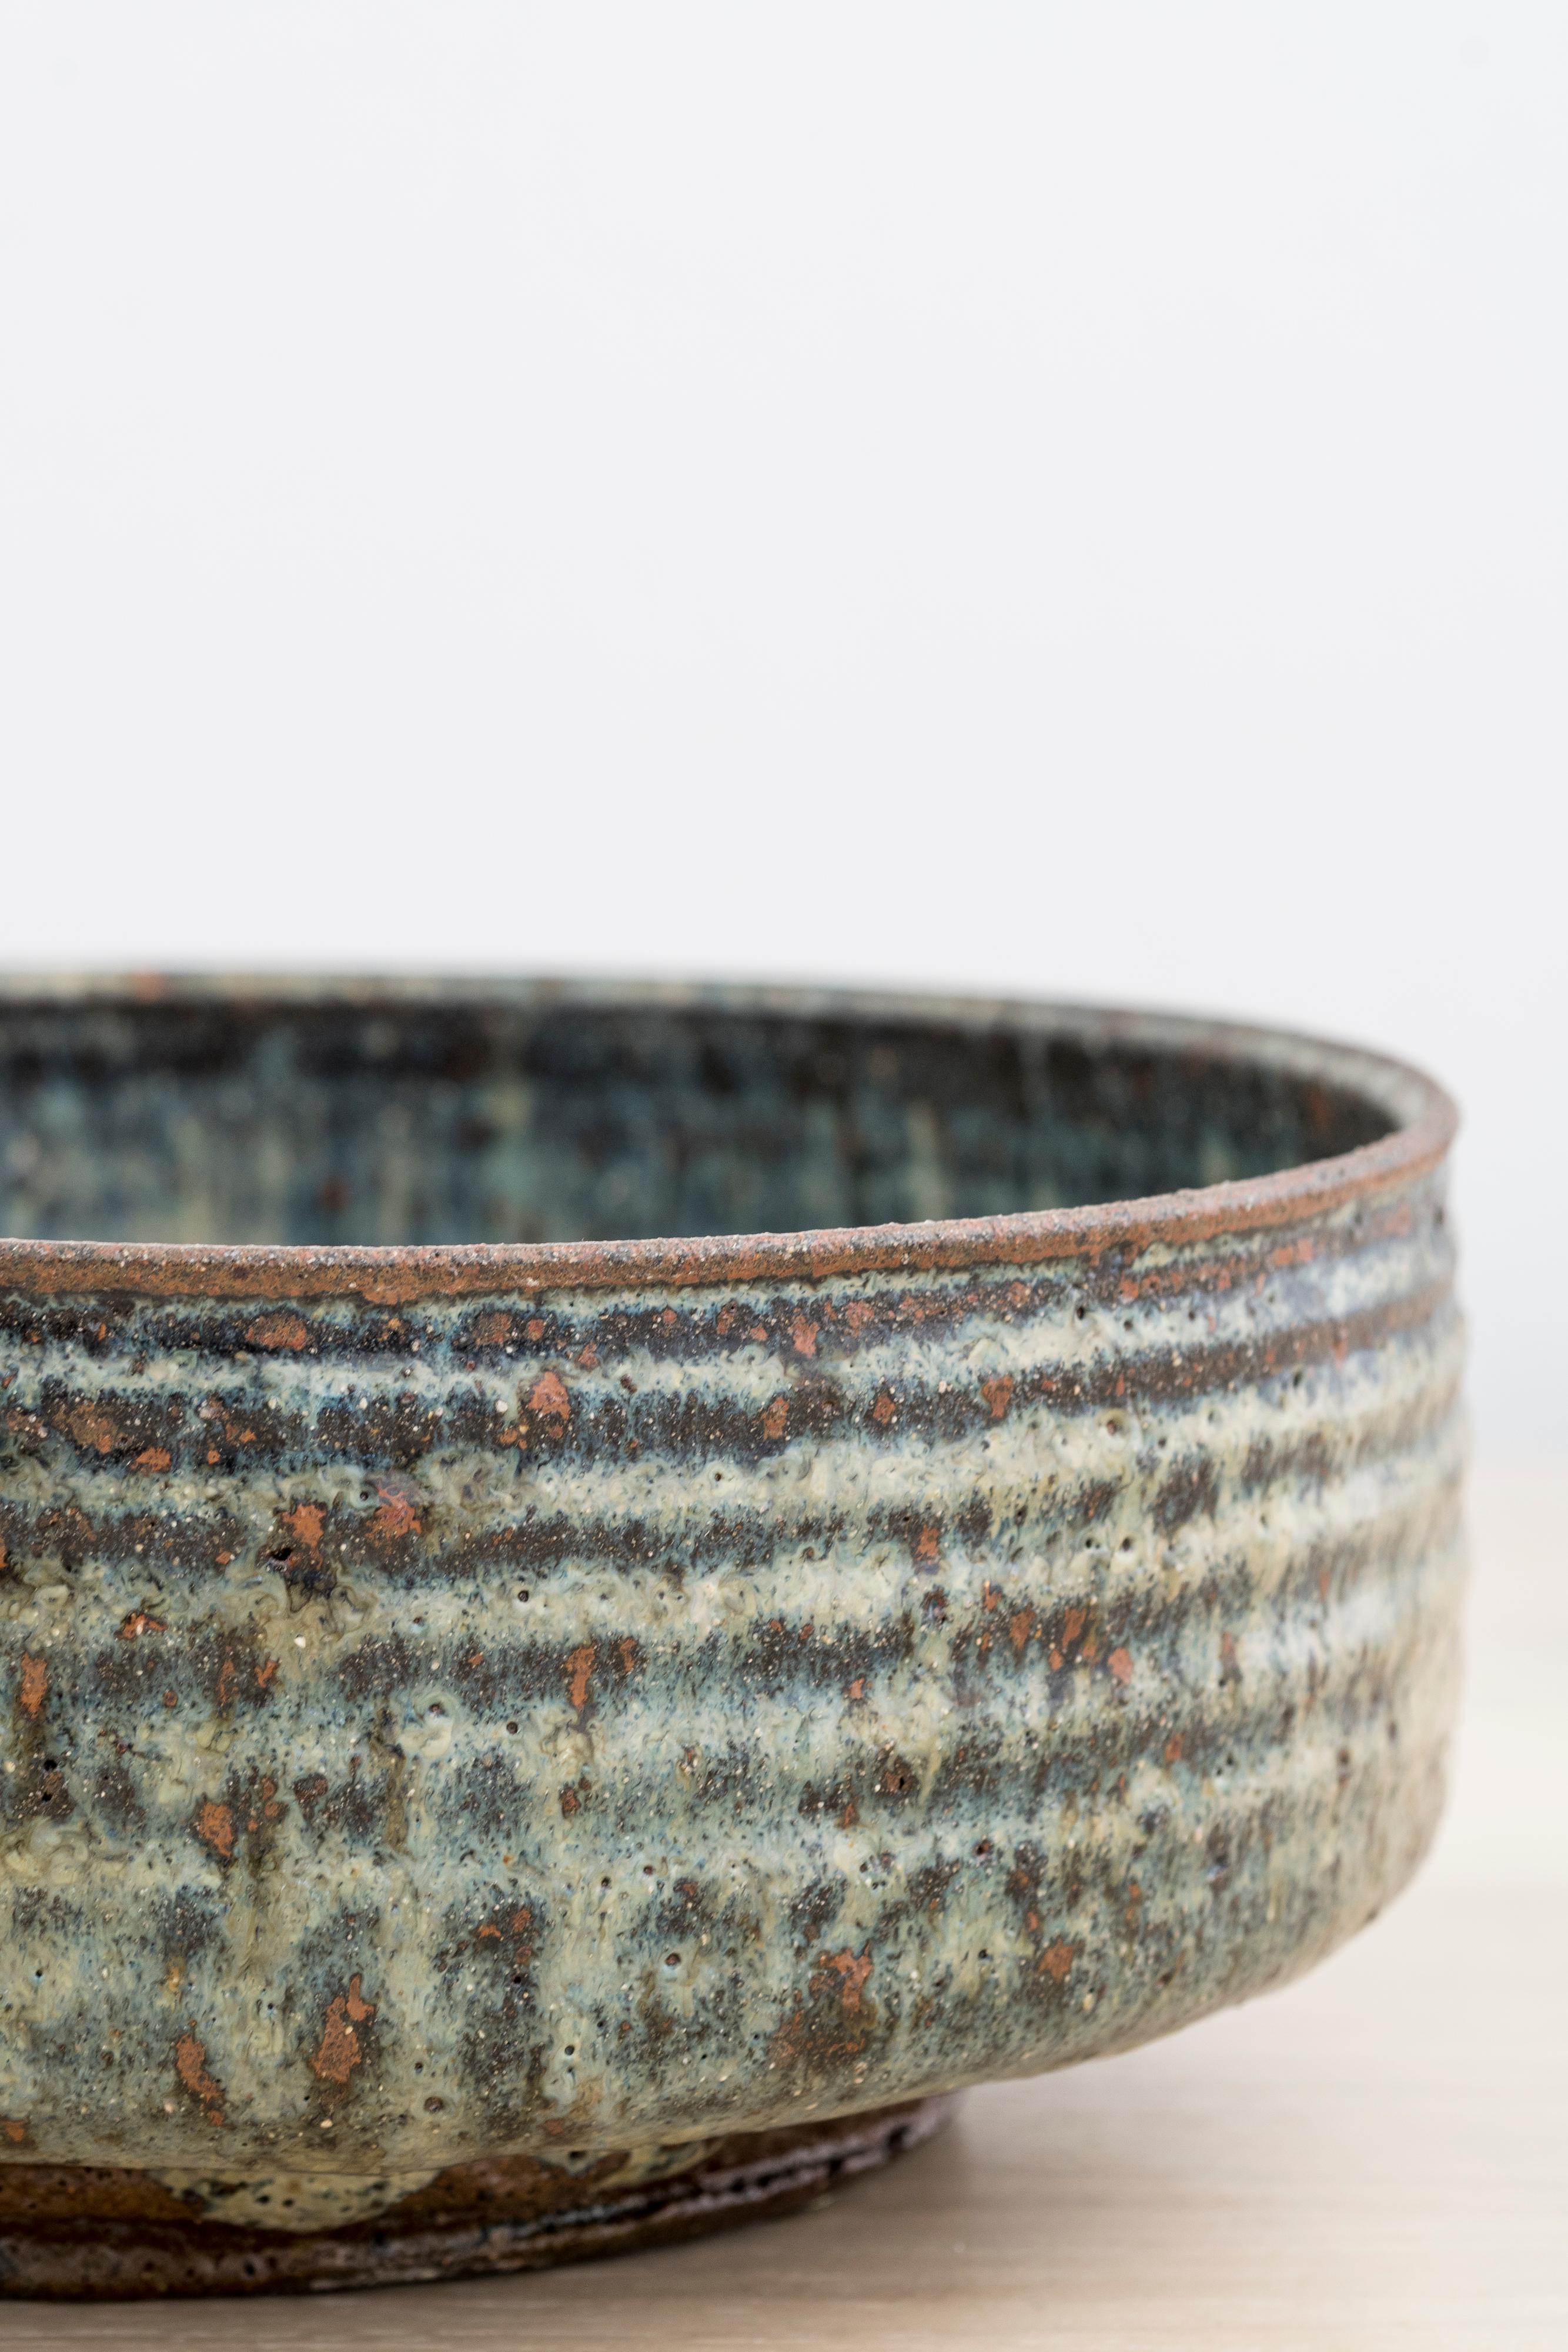 Stoneware bowl with impressed patterns and spiral to the well

Finished with grey and blue glazes, red and brown undertones

Incised with 